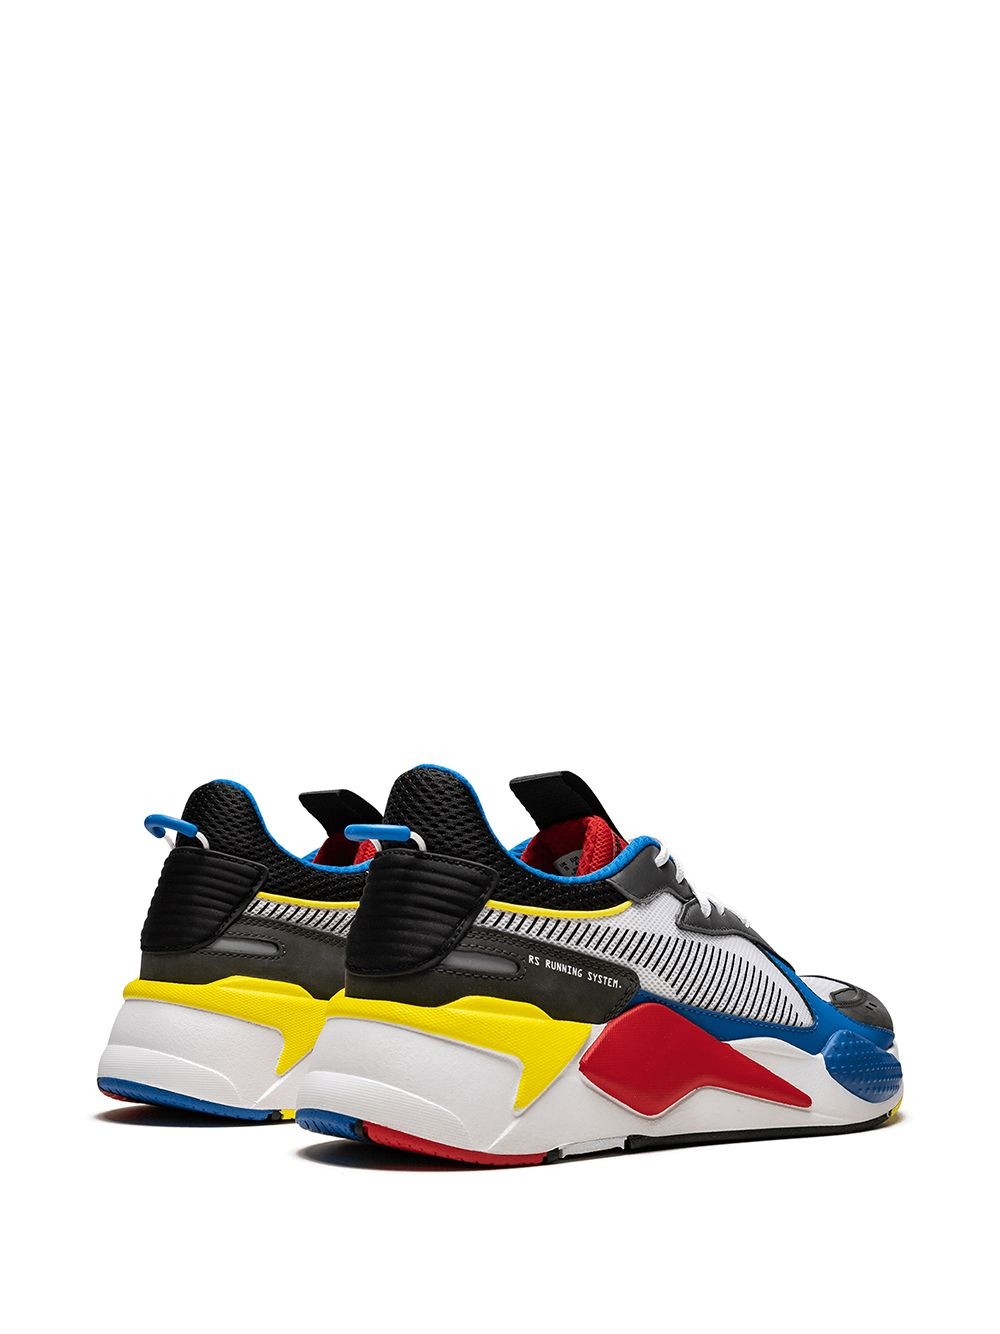 RS-X Toys sneakers - 3